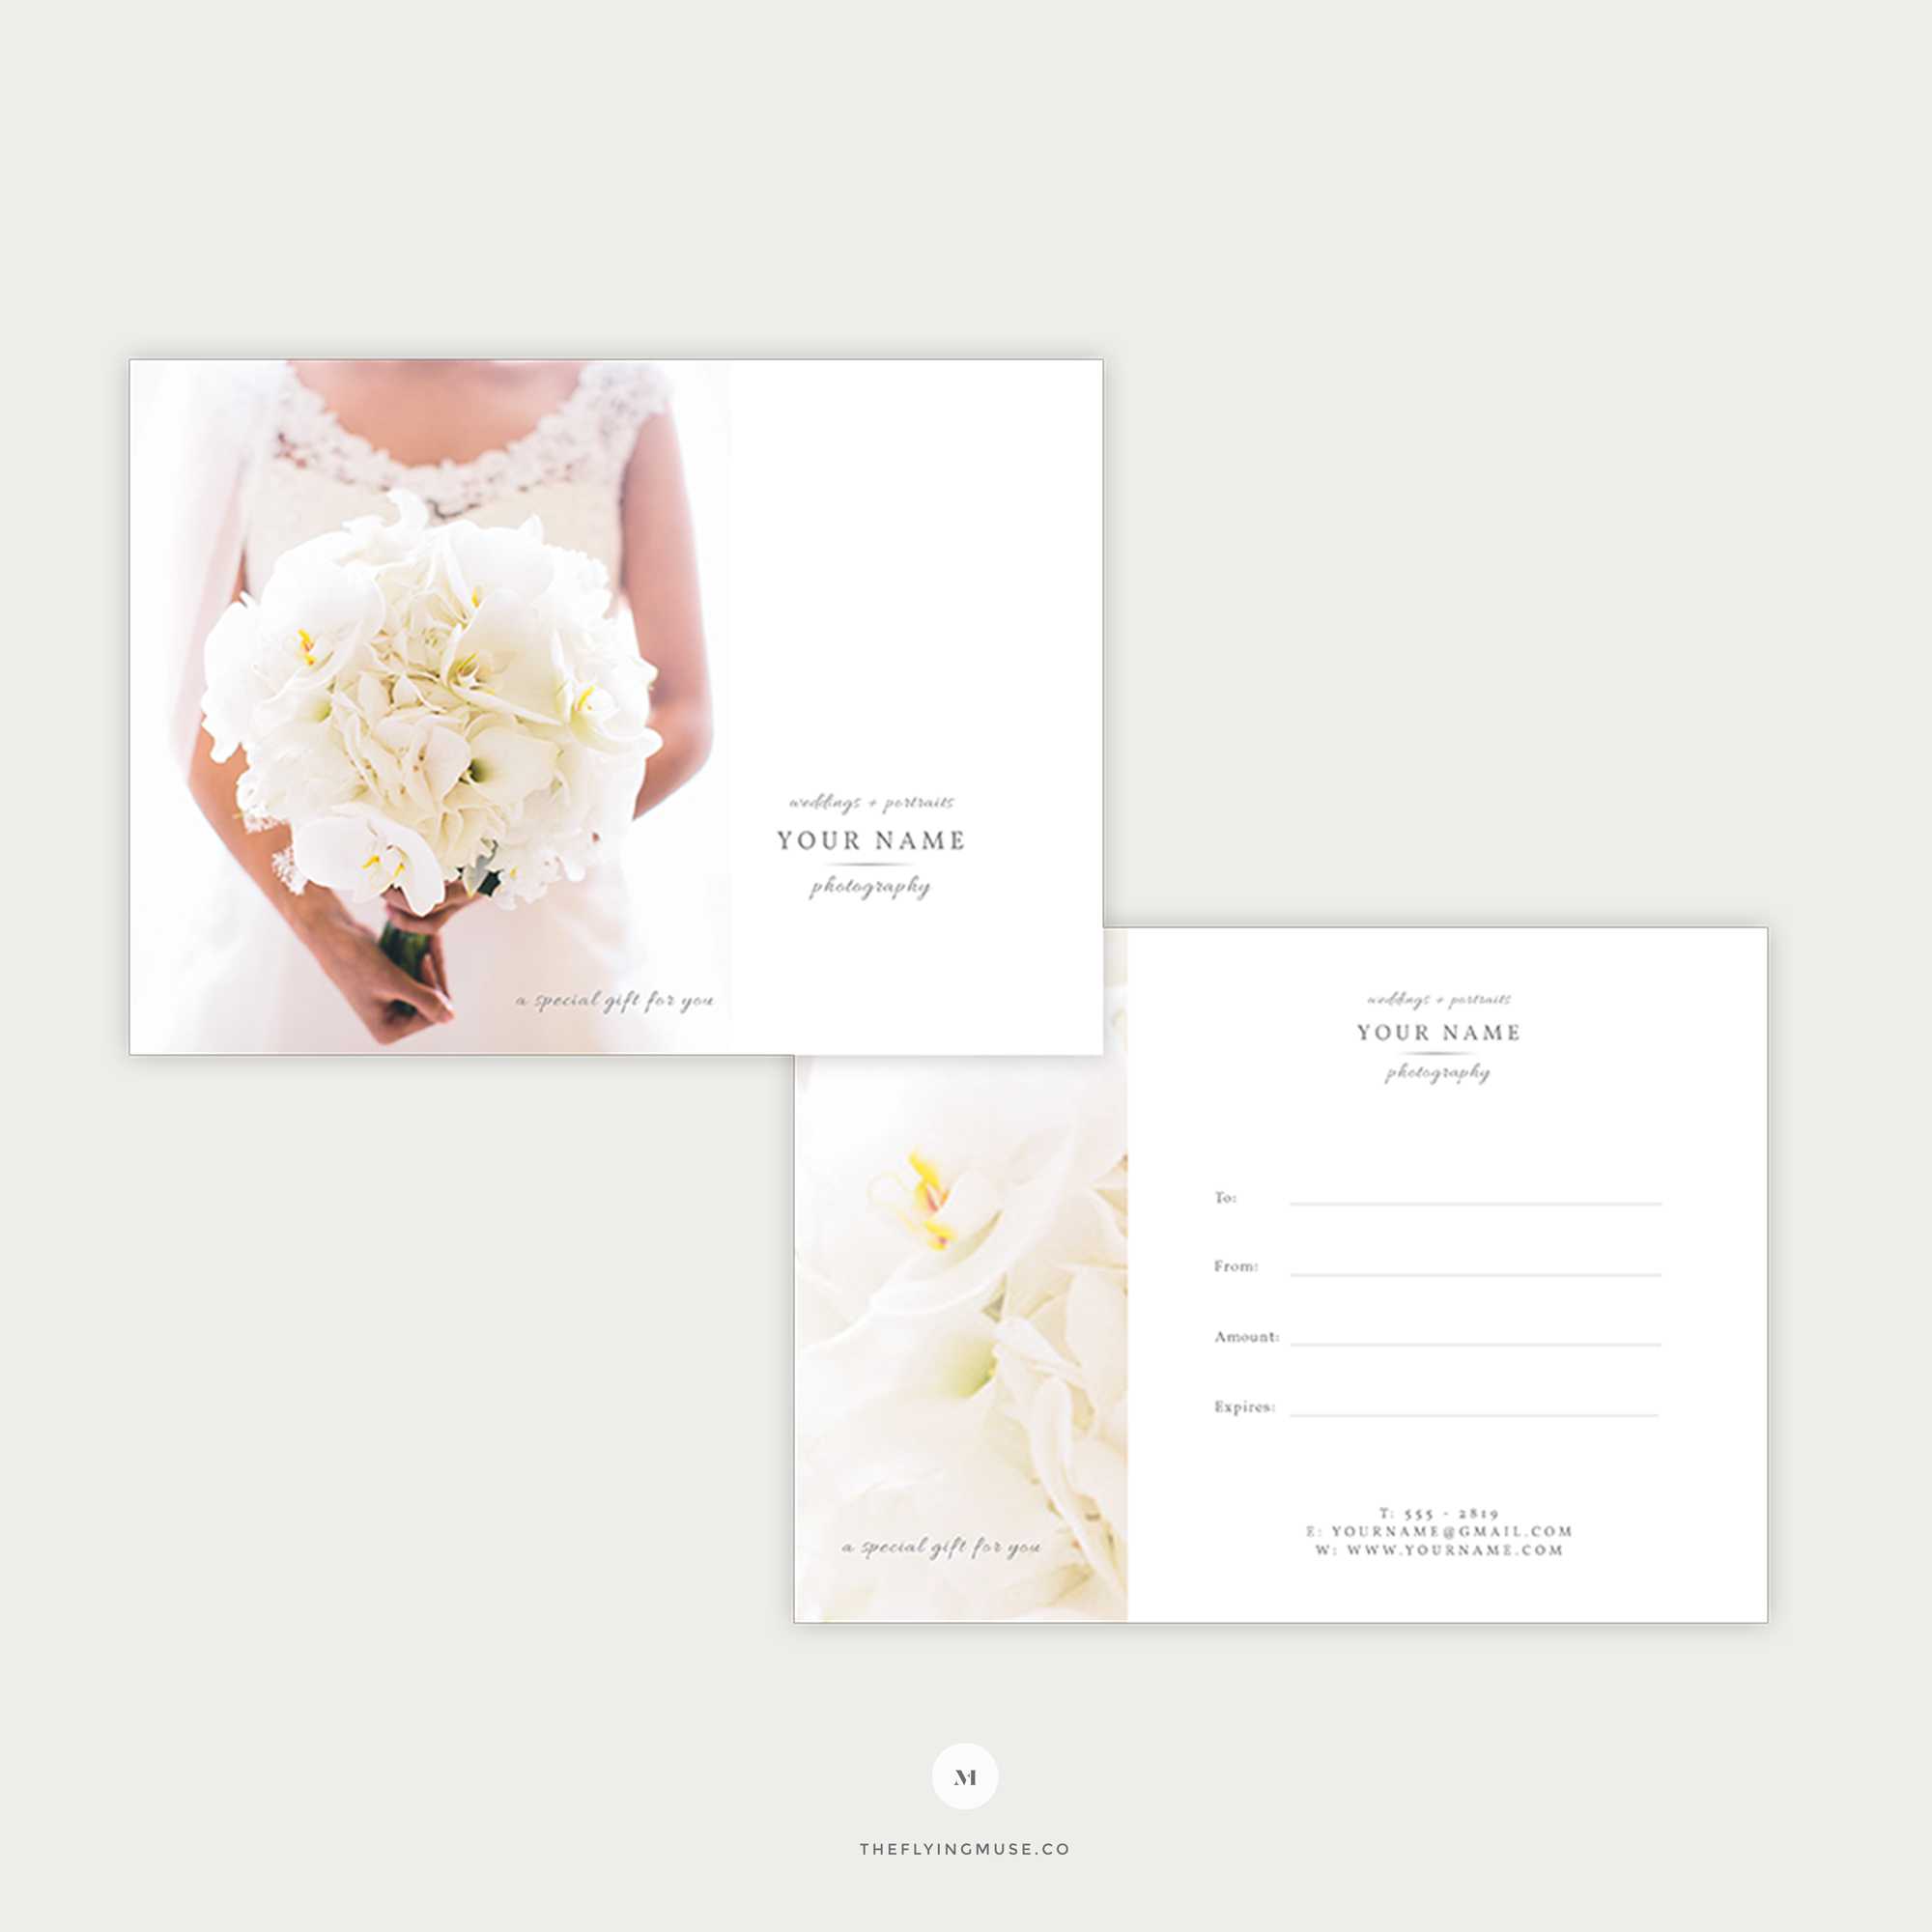 Elegant Gift Certificate Template For Wedding Photographers | The Flying  Muse With Regard To Elegant Gift Certificate Template